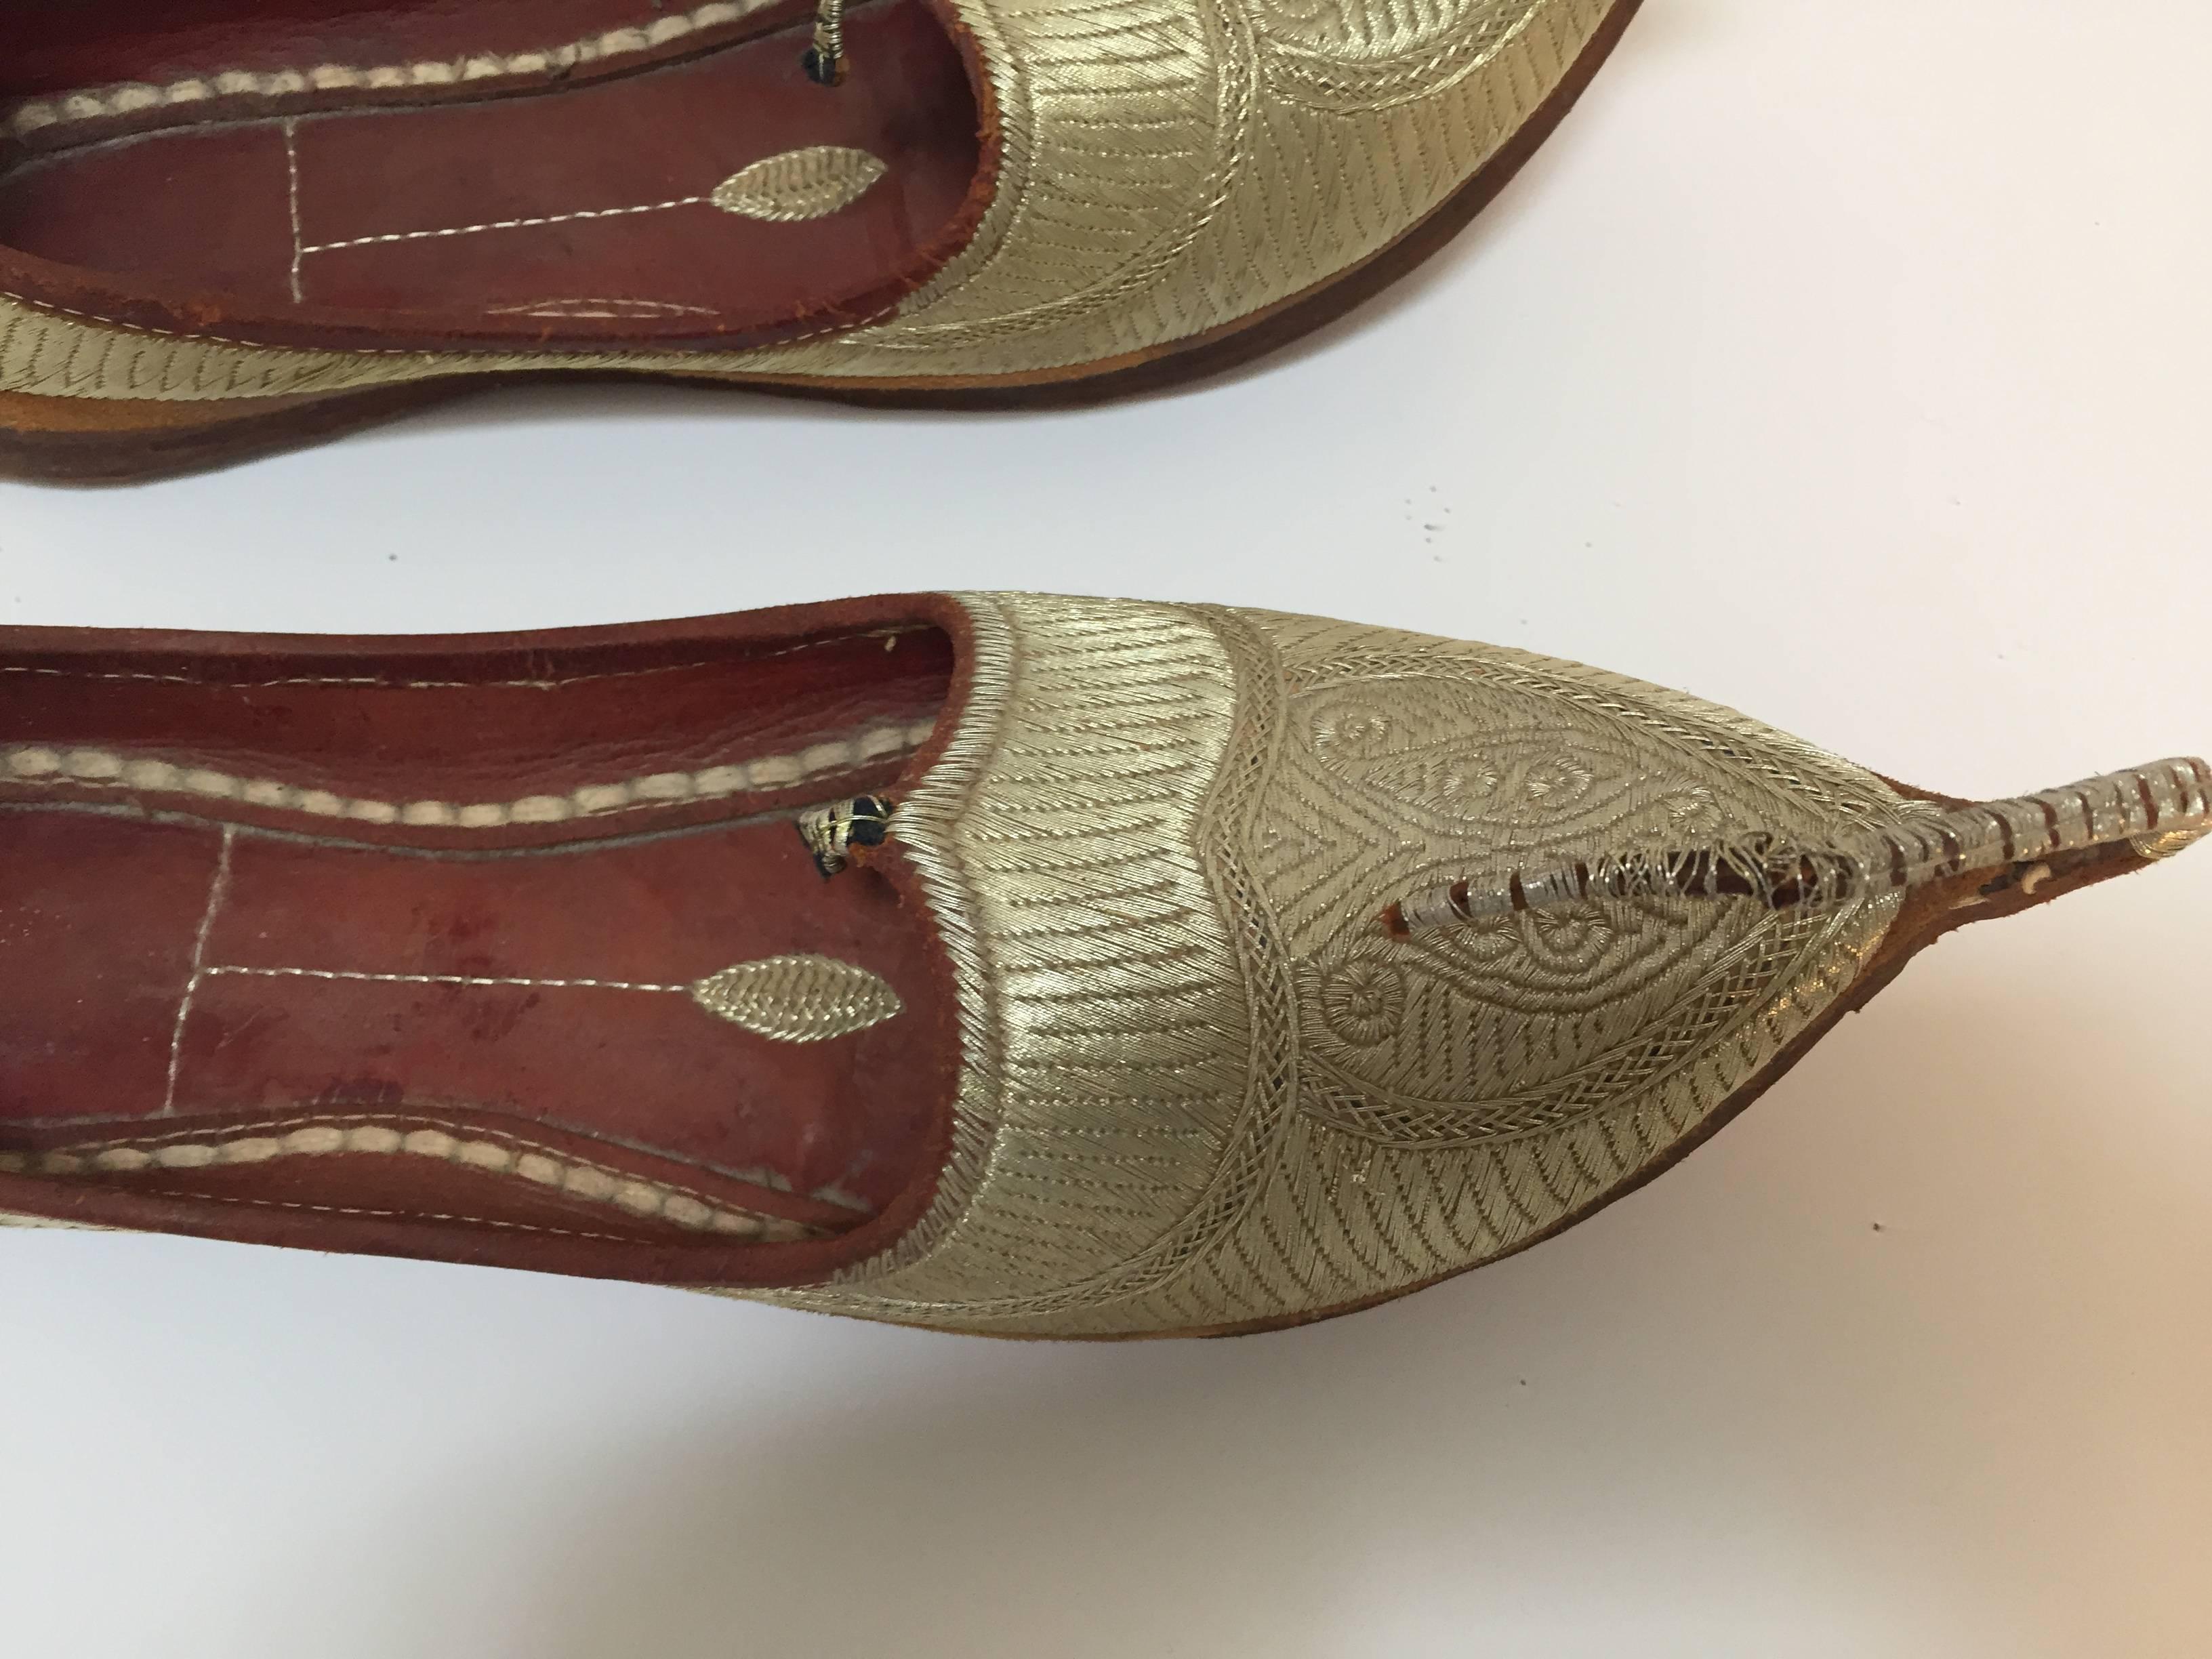 Islamic Moorish Arabian Mughal Leather Shoes with Gold Embroidered curled Toe  For Sale